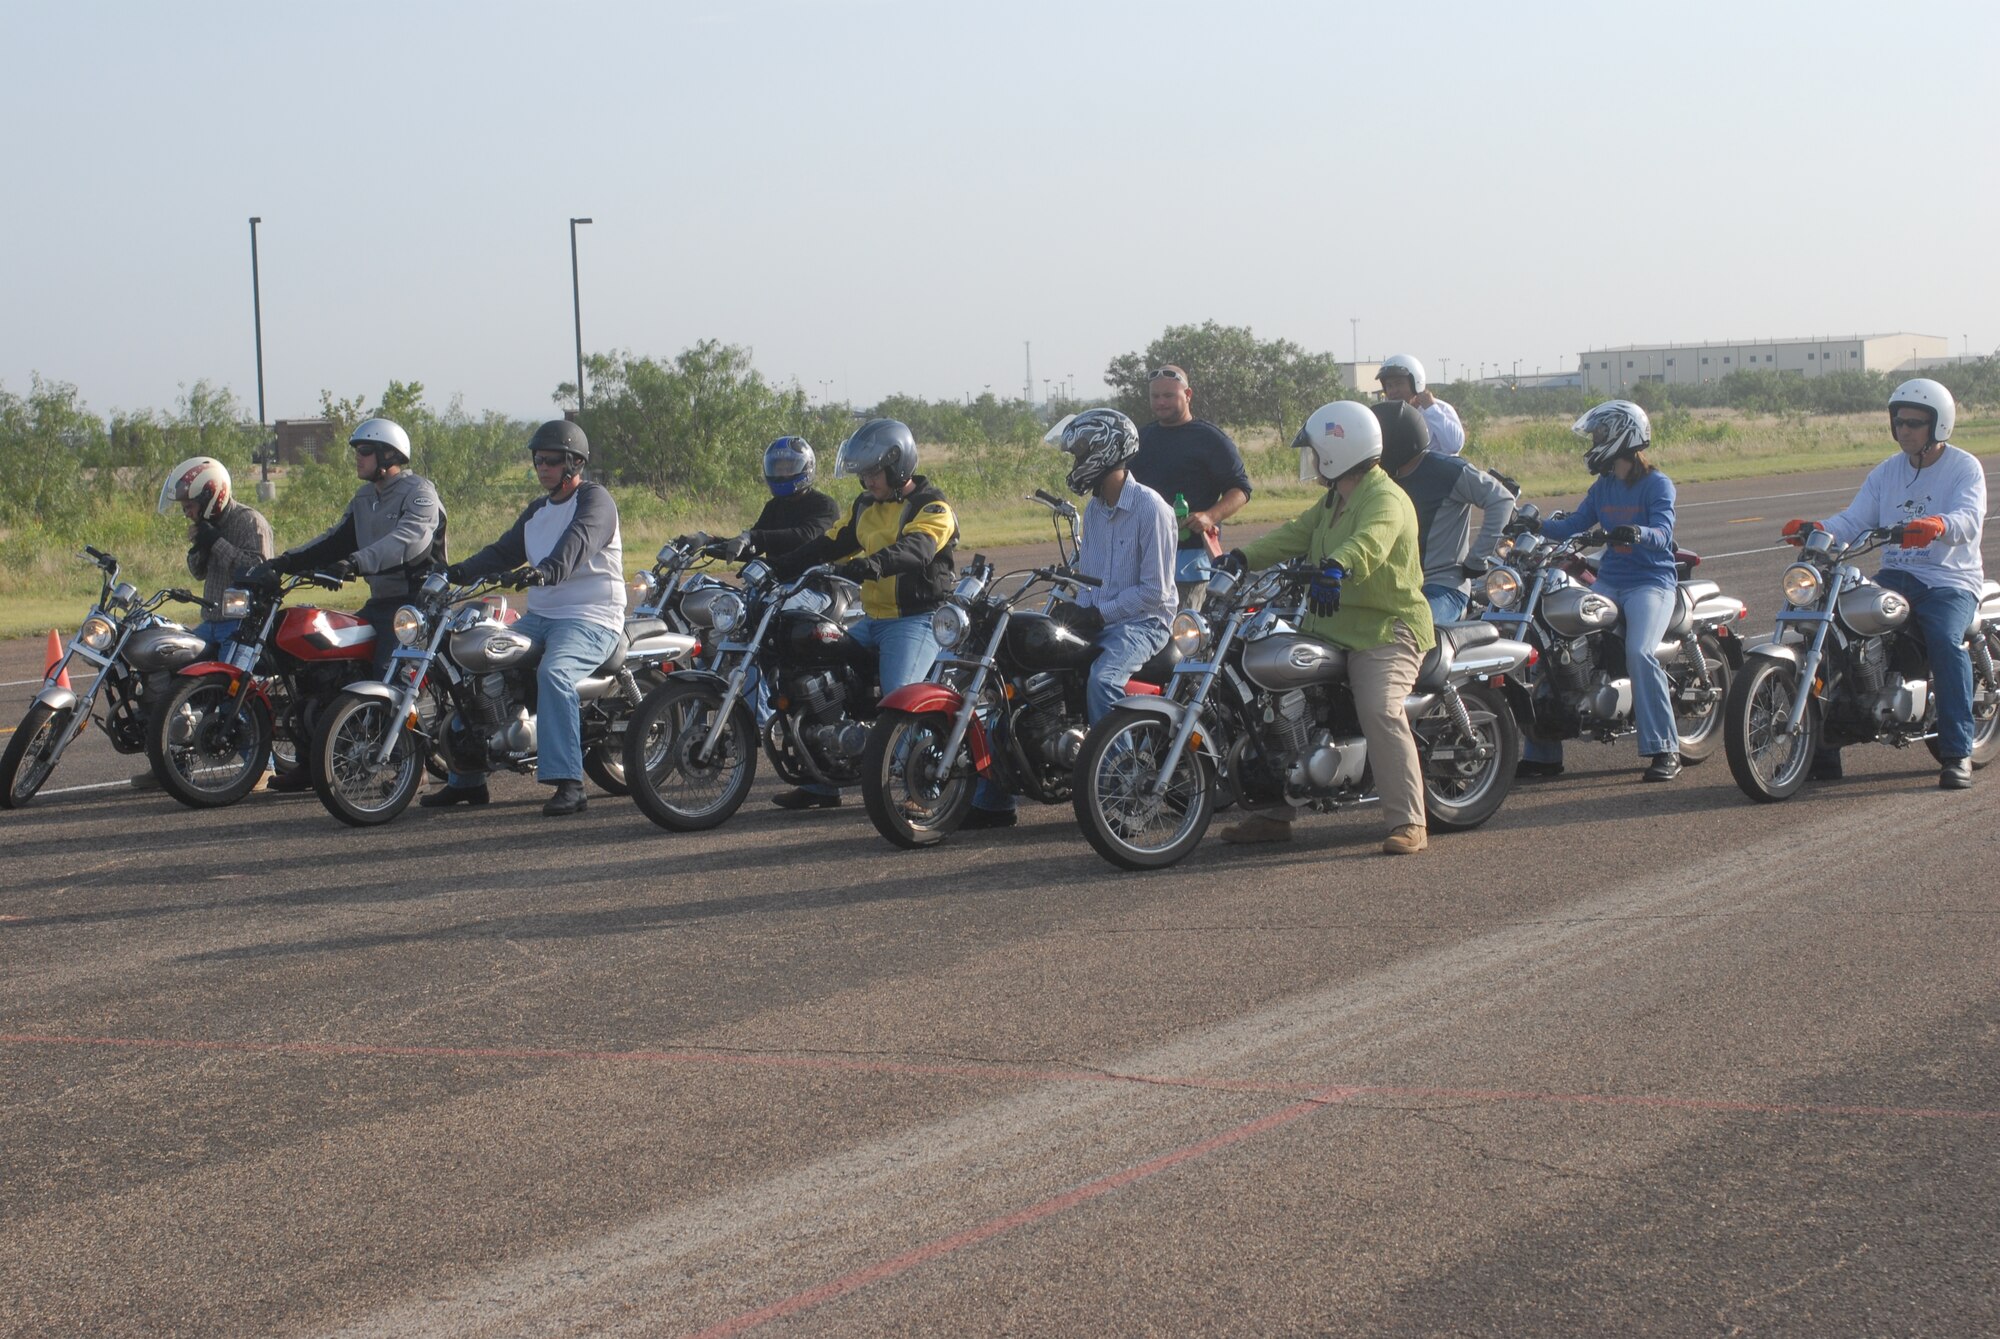 Members of Team Goodfellow prepare to start their motorcycle training July 28. The training is done by Marshall Munce and his son Ian Munce. (U.S. Air Force photo by Airman Clayton Lenhardt)